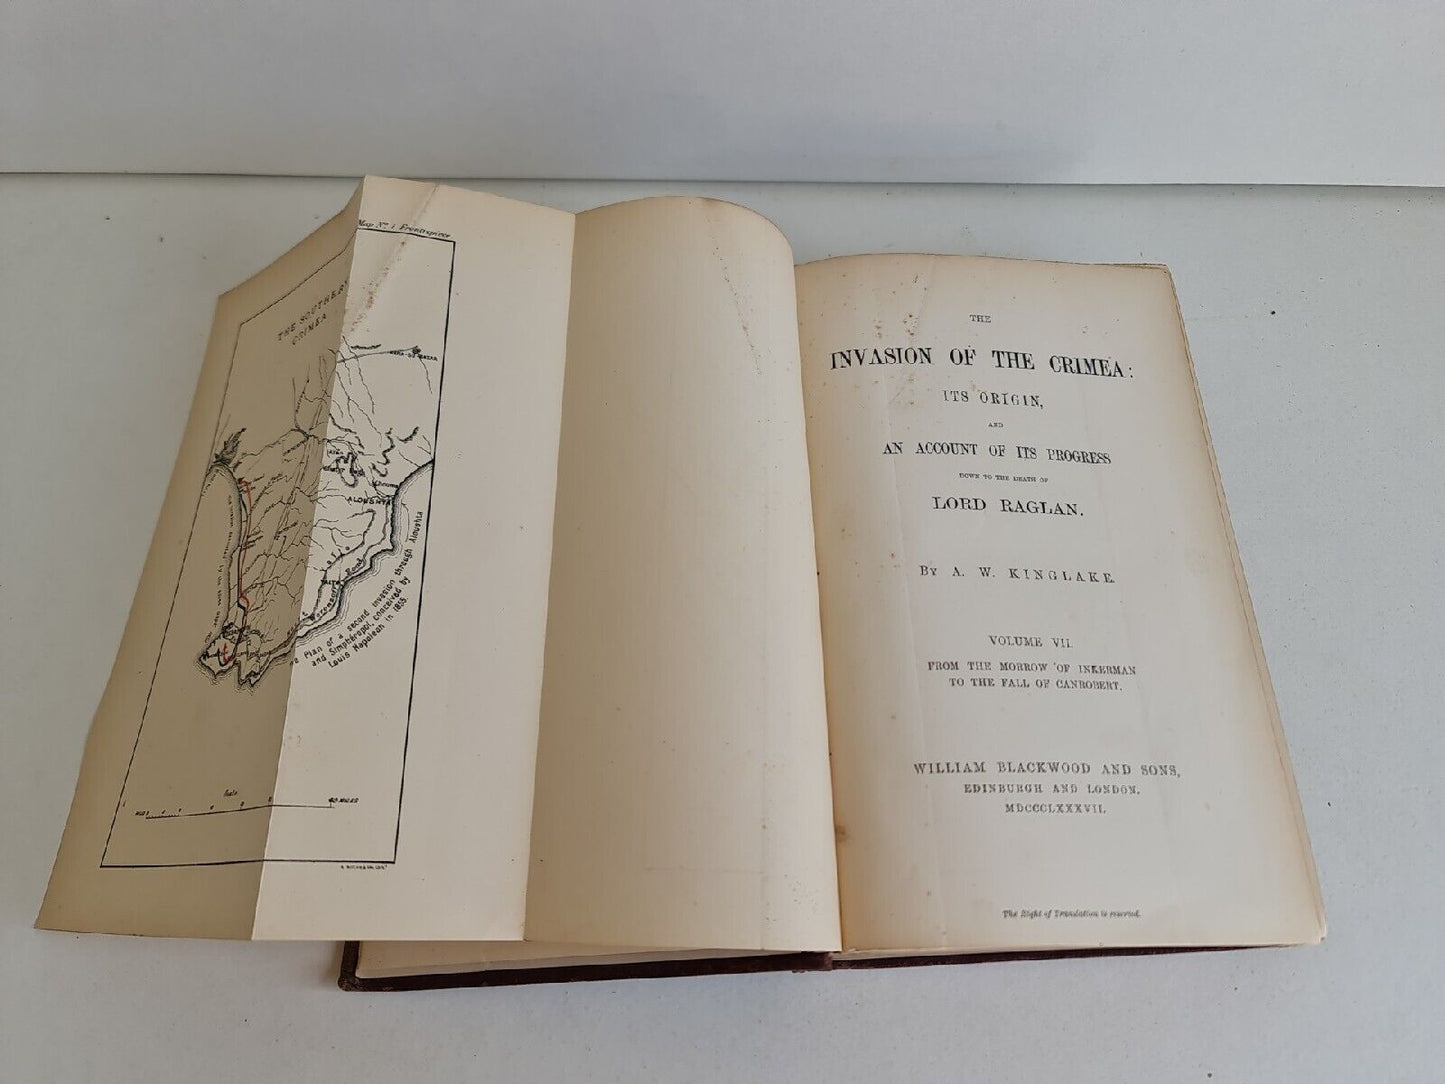 The Invasion of Crimea: Its Origin.. Vol 1-7 by AW Kinglake (1874-87)